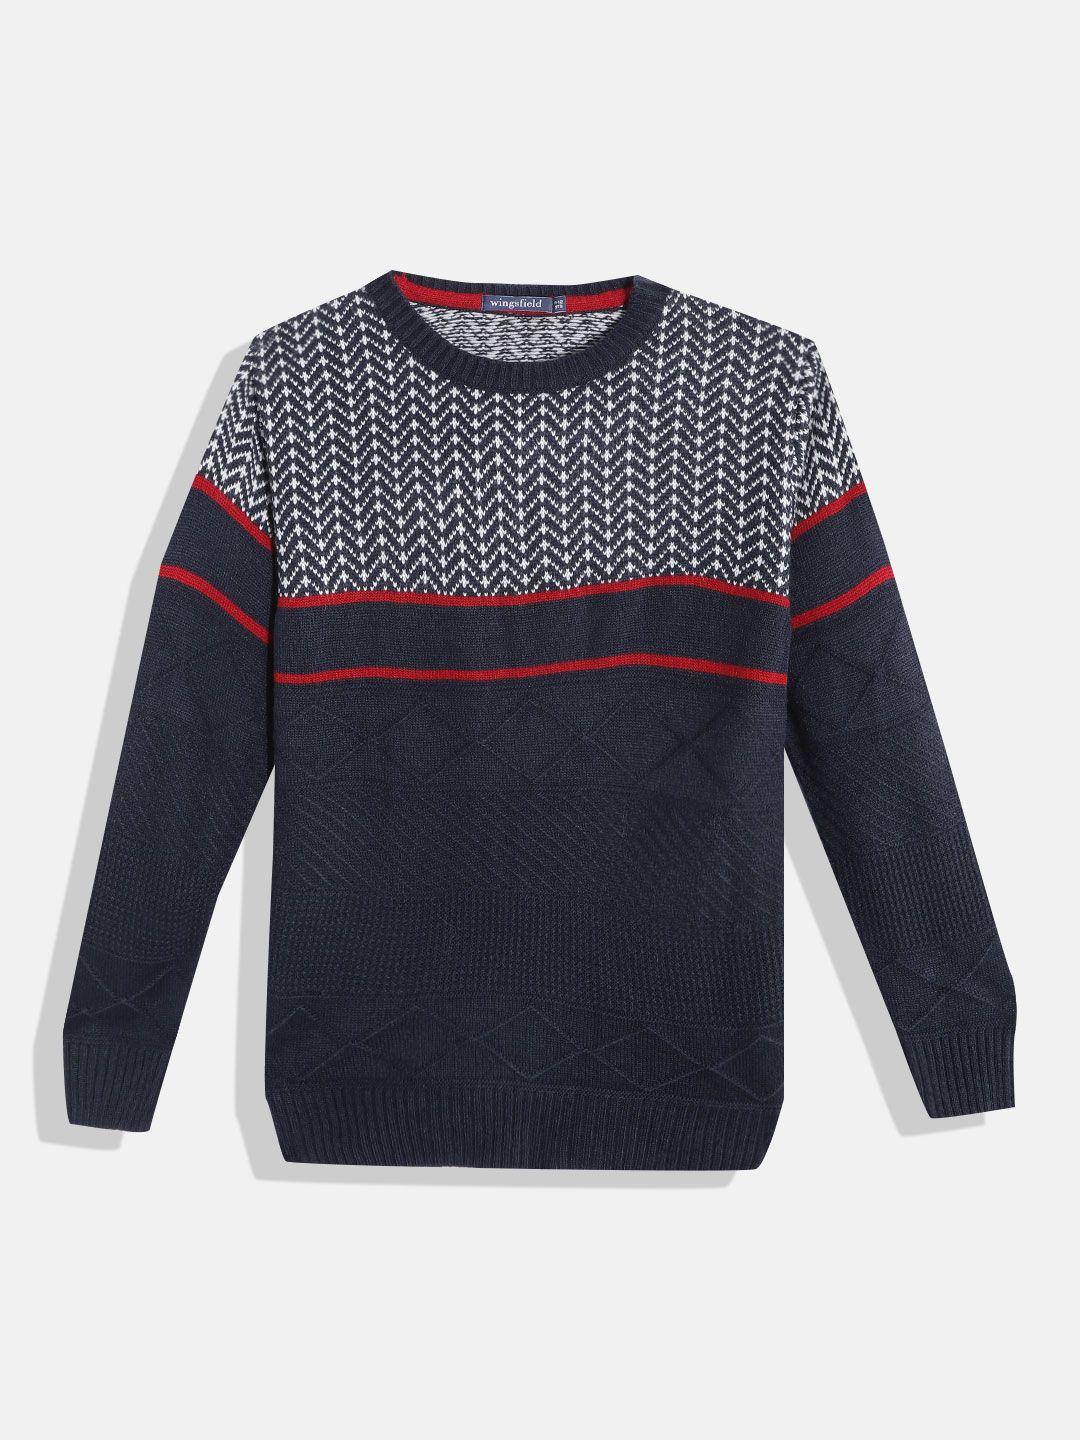 wingsfield-boys-navy-blue-&-white-printed-pullover